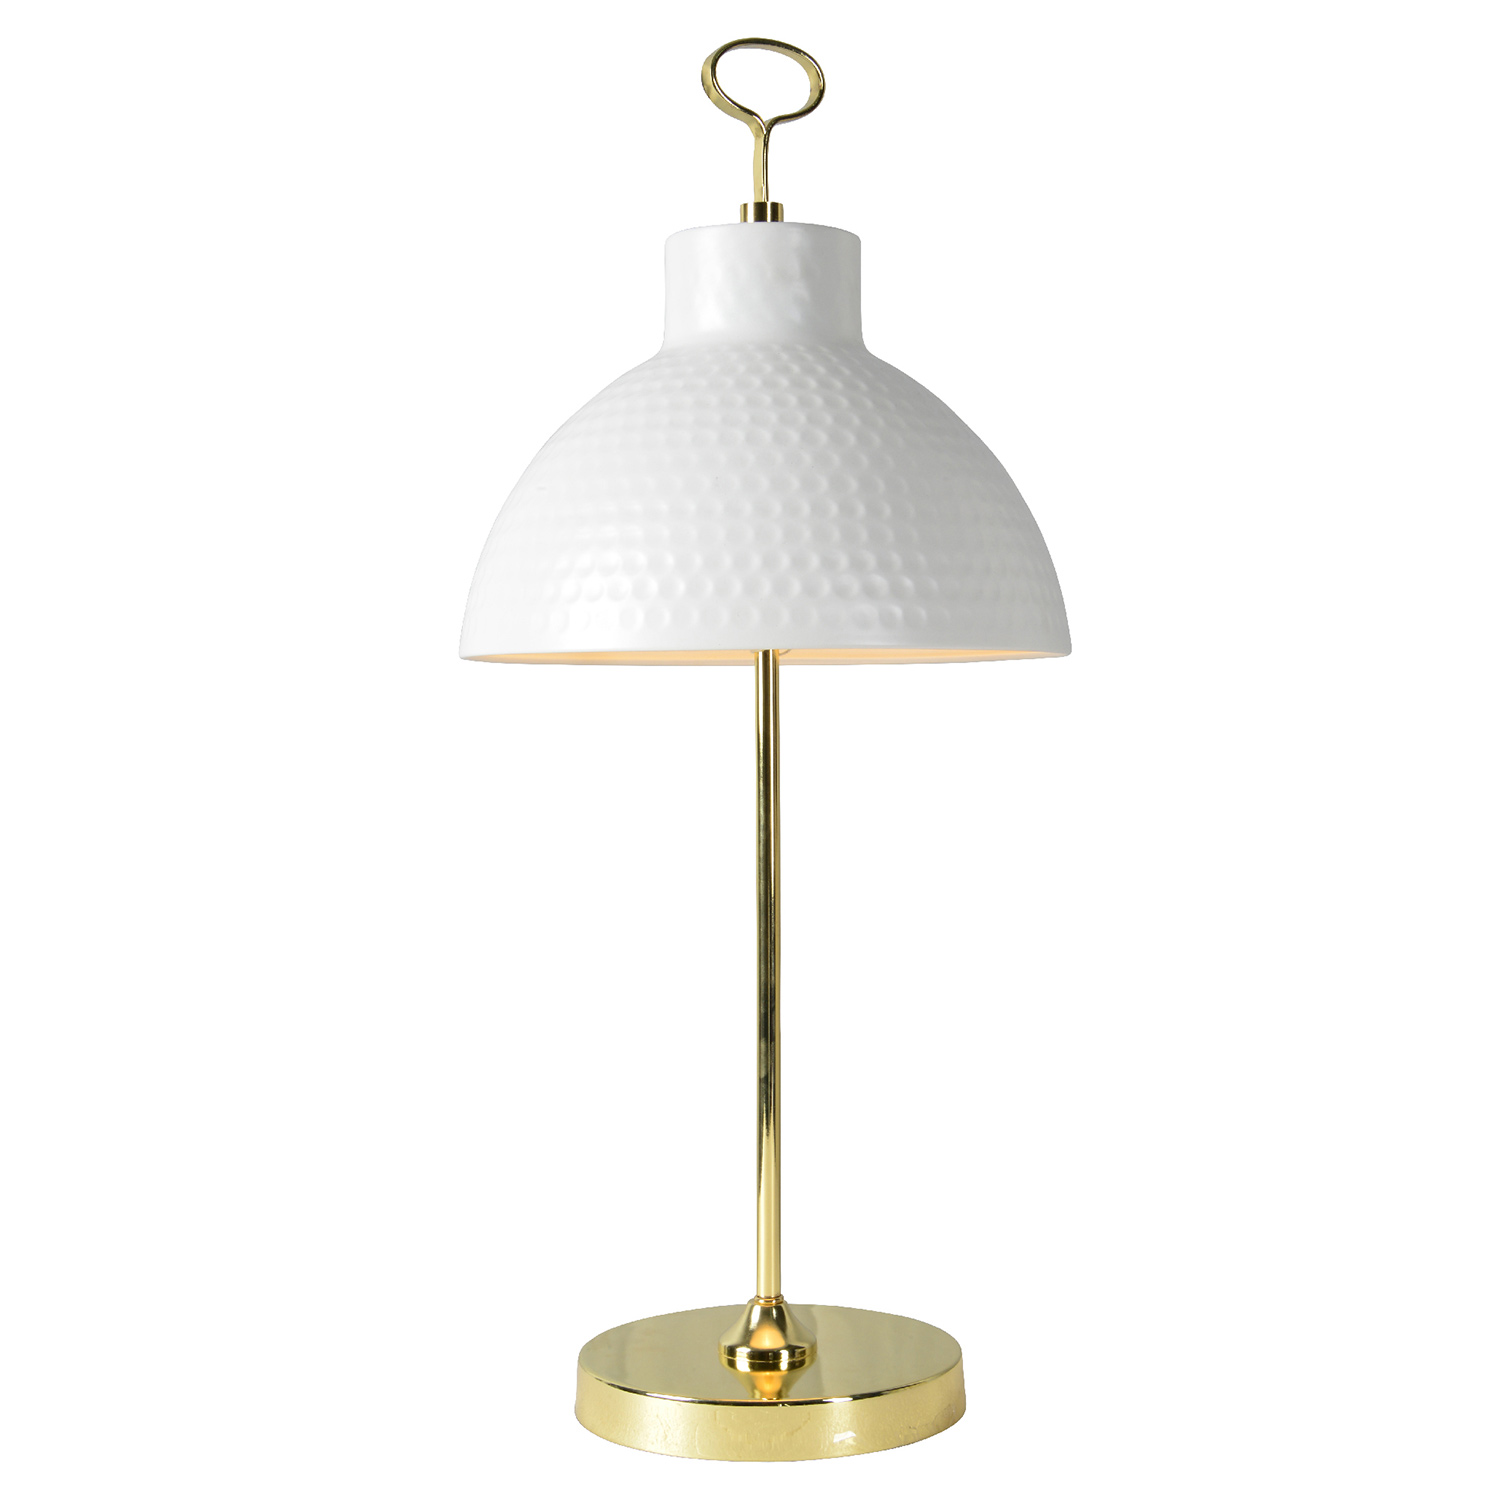 Ren-Wil Kili Table Lamp - Polished Gold plated